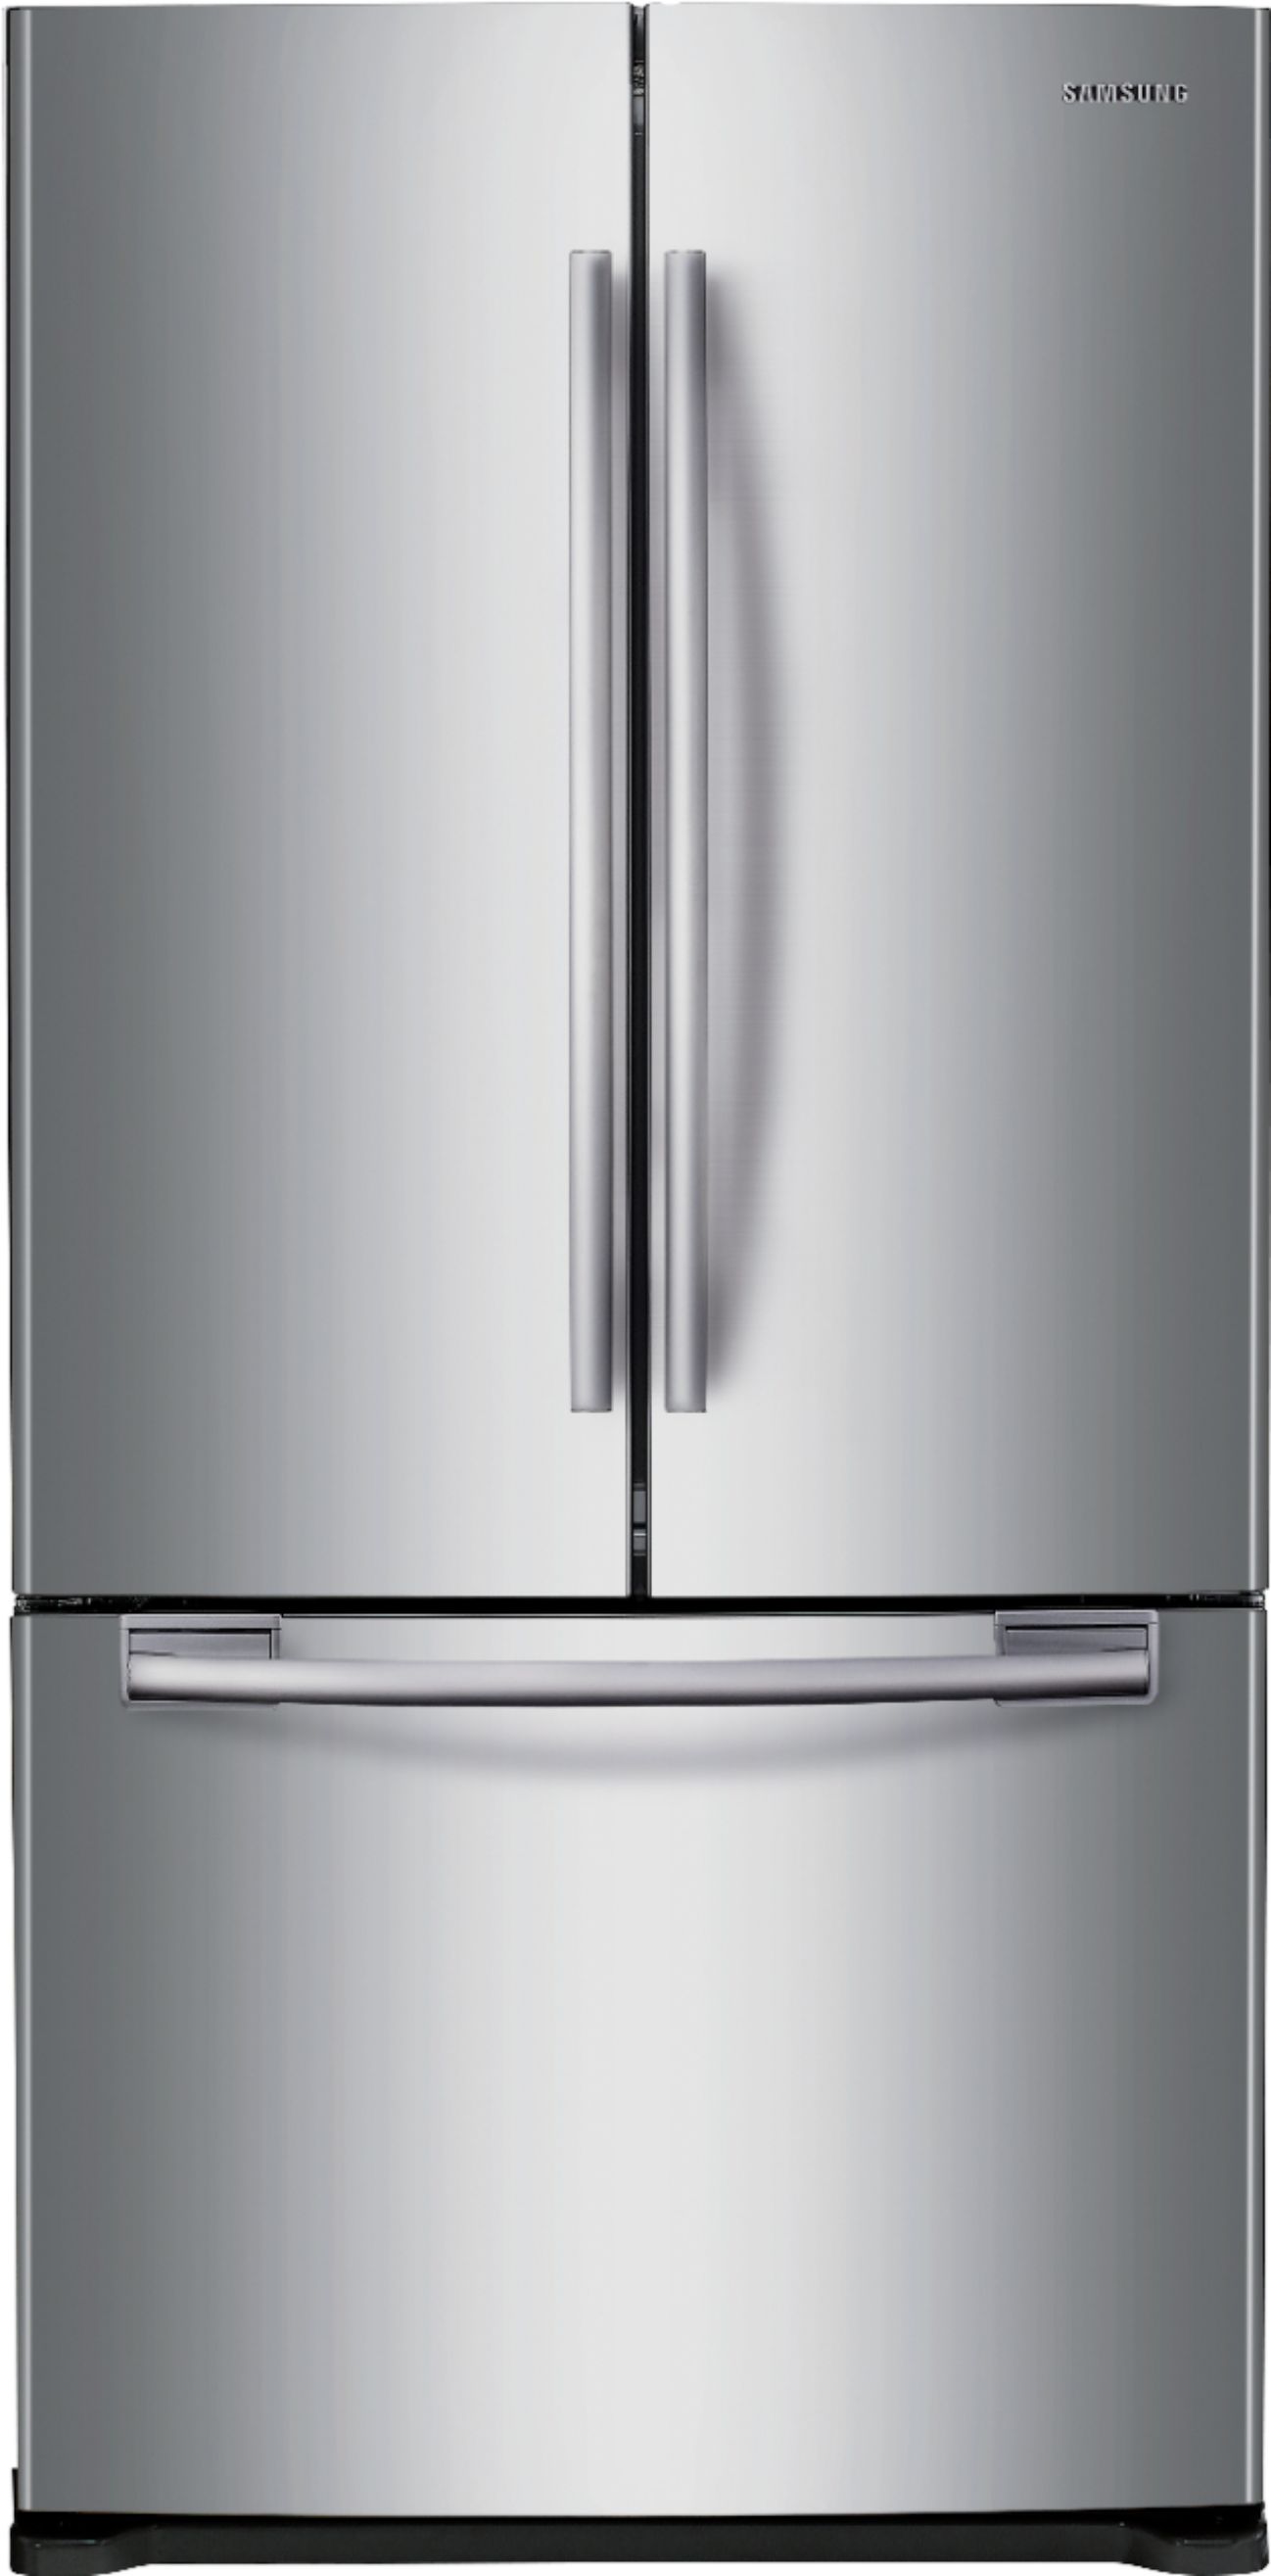 47+ How do i clean my samsung stainless steel refrigerator information